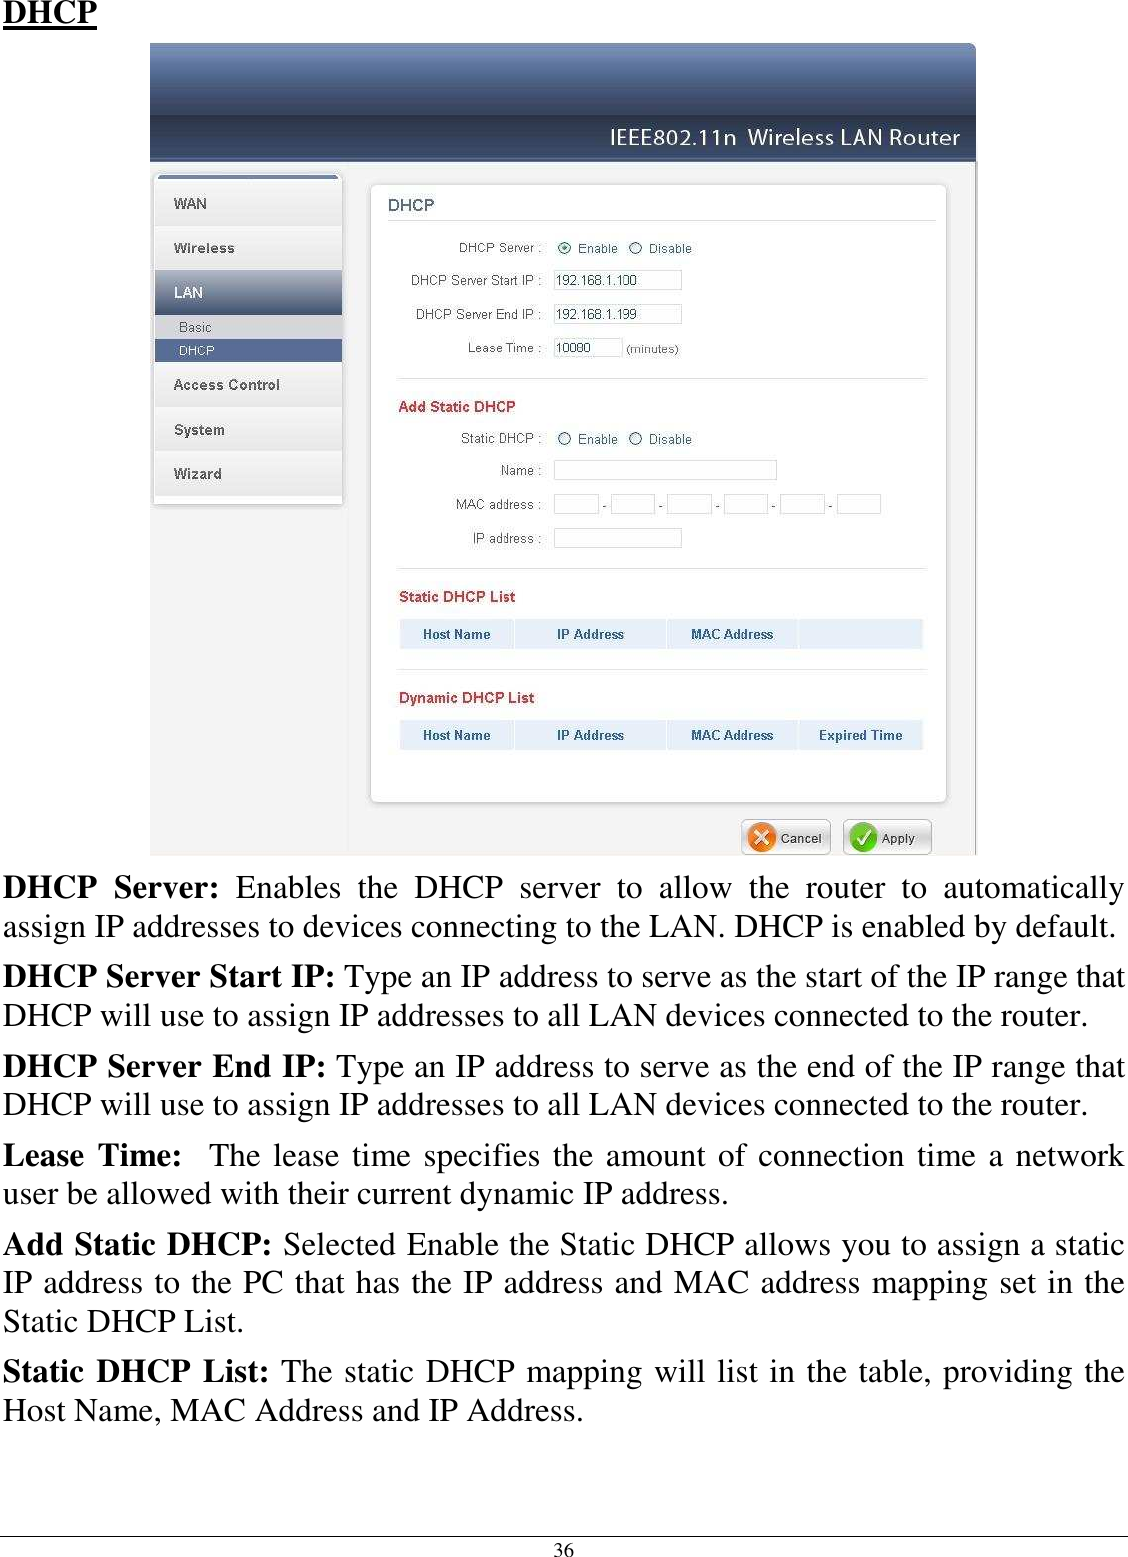 36 DHCP  DHCP  Server:  Enables  the  DHCP  server  to  allow  the  router  to  automatically assign IP addresses to devices connecting to the LAN. DHCP is enabled by default. DHCP Server Start IP: Type an IP address to serve as the start of the IP range that DHCP will use to assign IP addresses to all LAN devices connected to the router. DHCP Server End IP: Type an IP address to serve as the end of the IP range that DHCP will use to assign IP addresses to all LAN devices connected to the router. Lease Time:  The lease time specifies the amount of connection time a network user be allowed with their current dynamic IP address. Add Static DHCP: Selected Enable the Static DHCP allows you to assign a static IP address to the PC that has the IP address and MAC address mapping set in the Static DHCP List. Static DHCP List: The static DHCP mapping will list in the table, providing the Host Name, MAC Address and IP Address.  